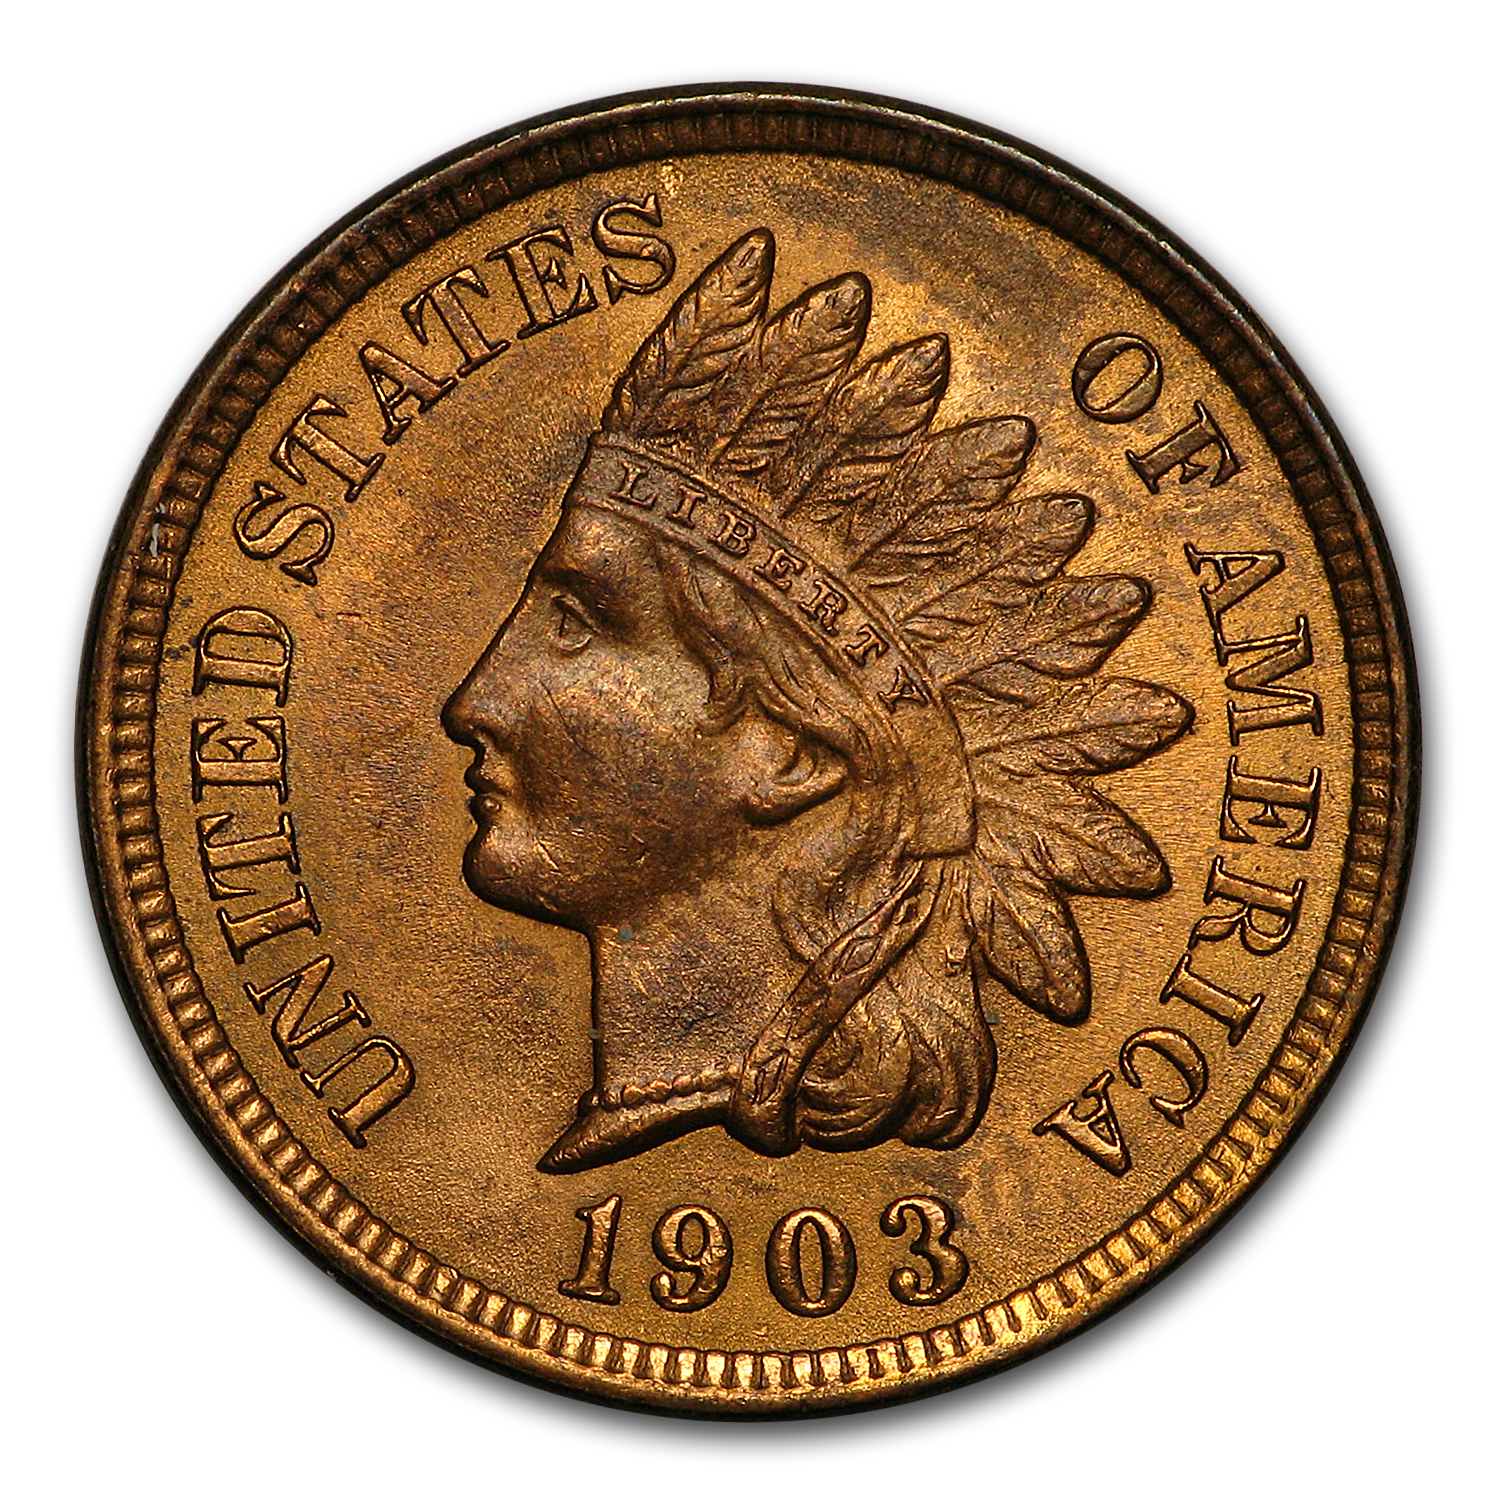 Buy 1903 Indian Head Cent BU (Red/Brown)